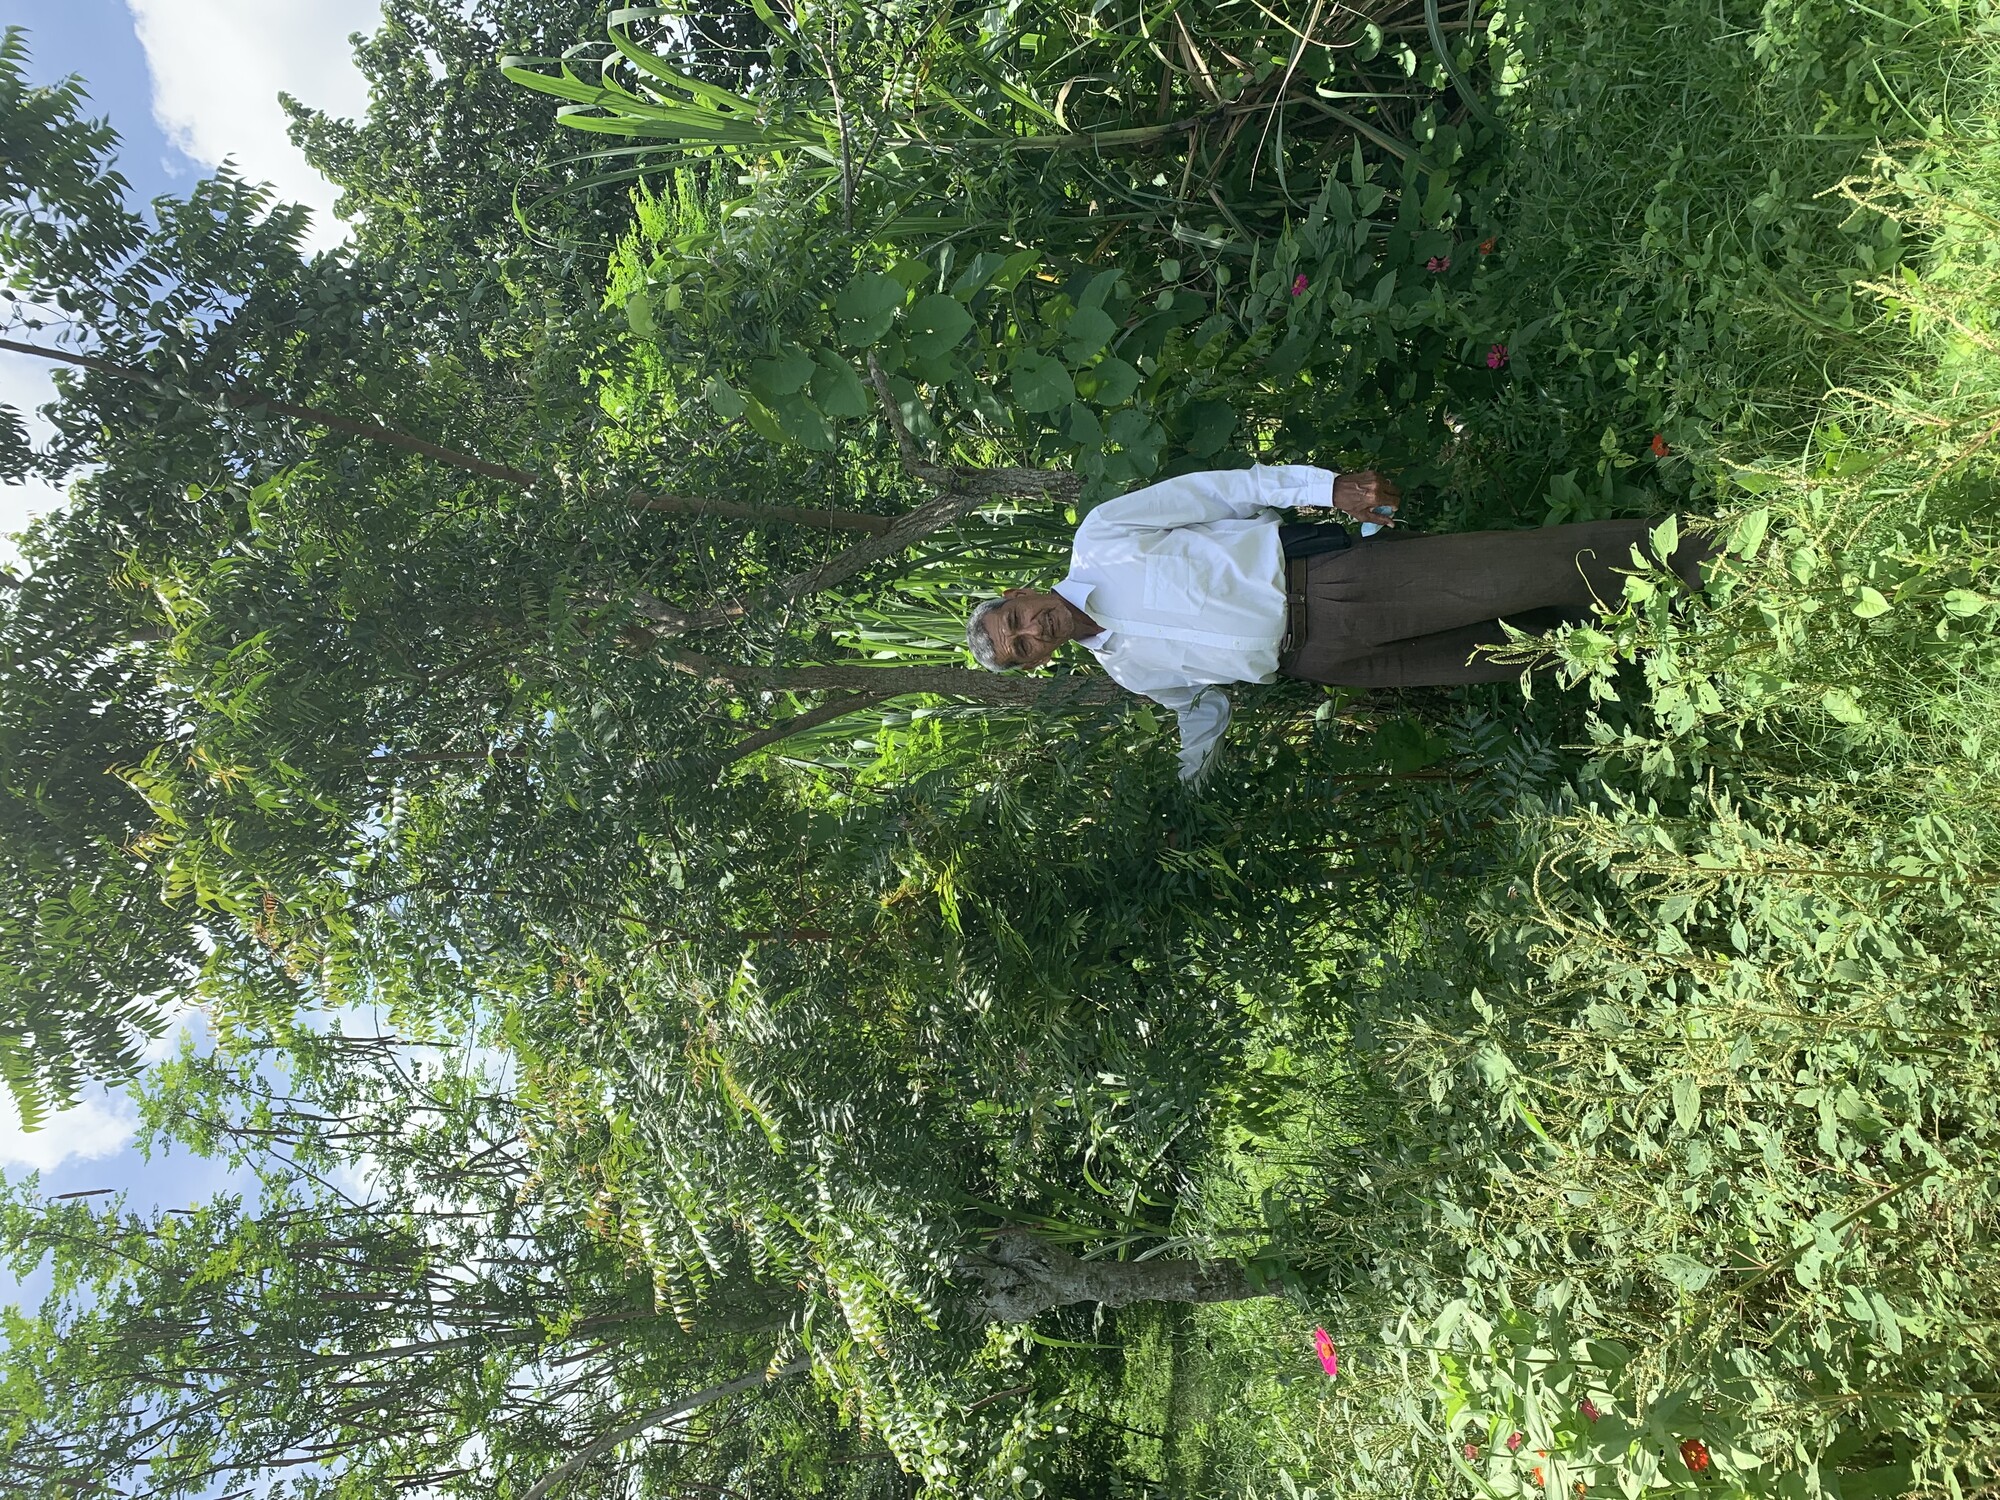 A man in dress clothes stands next to a neem tree